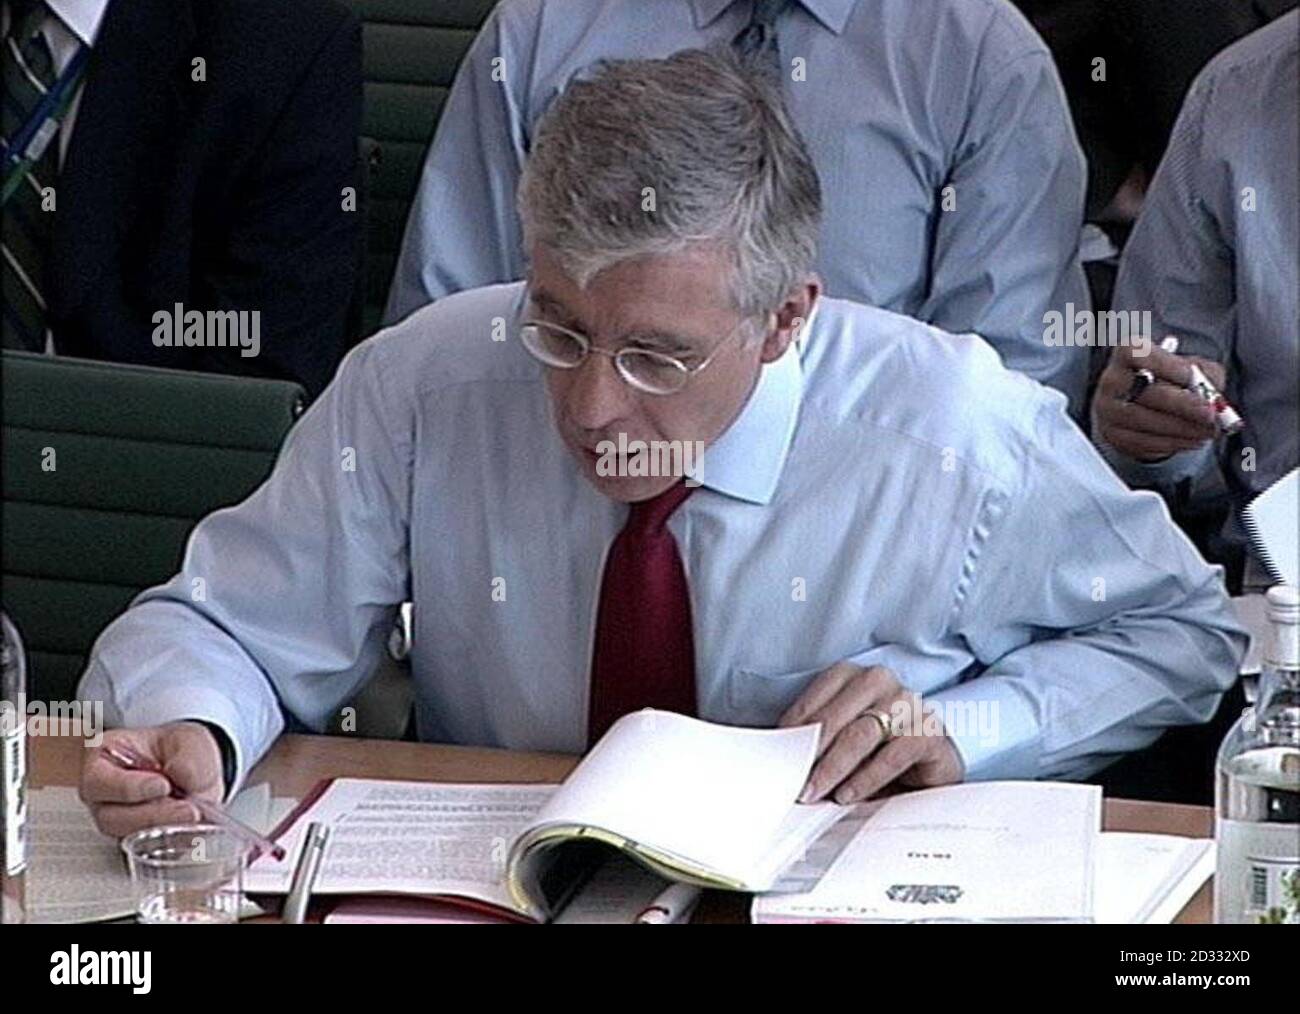 Foreign Secretary Jack Straw consults documents as he gives evidence to the House of Commons foreign affairs select committee as the furore over the Government's presentation of its case for the war against Iraq continued.    *... Earlier Mr Straw acknowledged that a dossier of evidence of Saddam Hussein's military capability, published in February and partly based on a plagiarised student thesis, was an 'embarrassment' to the Government. Stock Photo